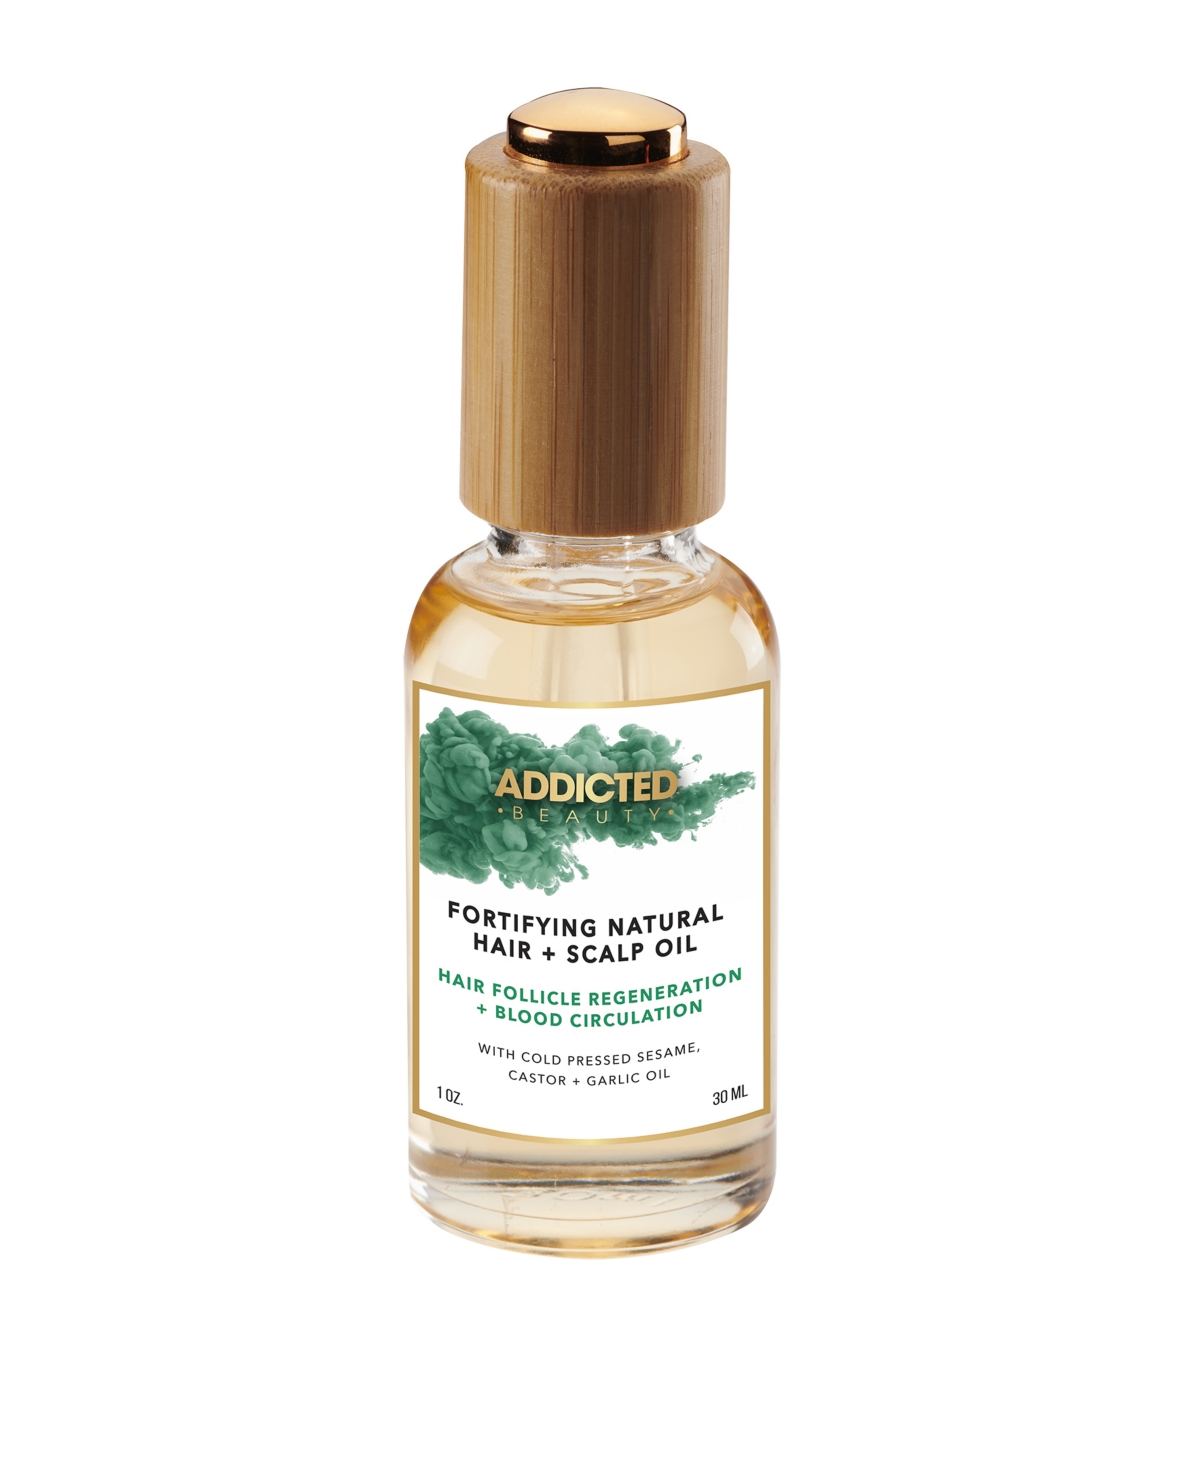 Fortifying Natural Hair plus Scalp Oil - Gold